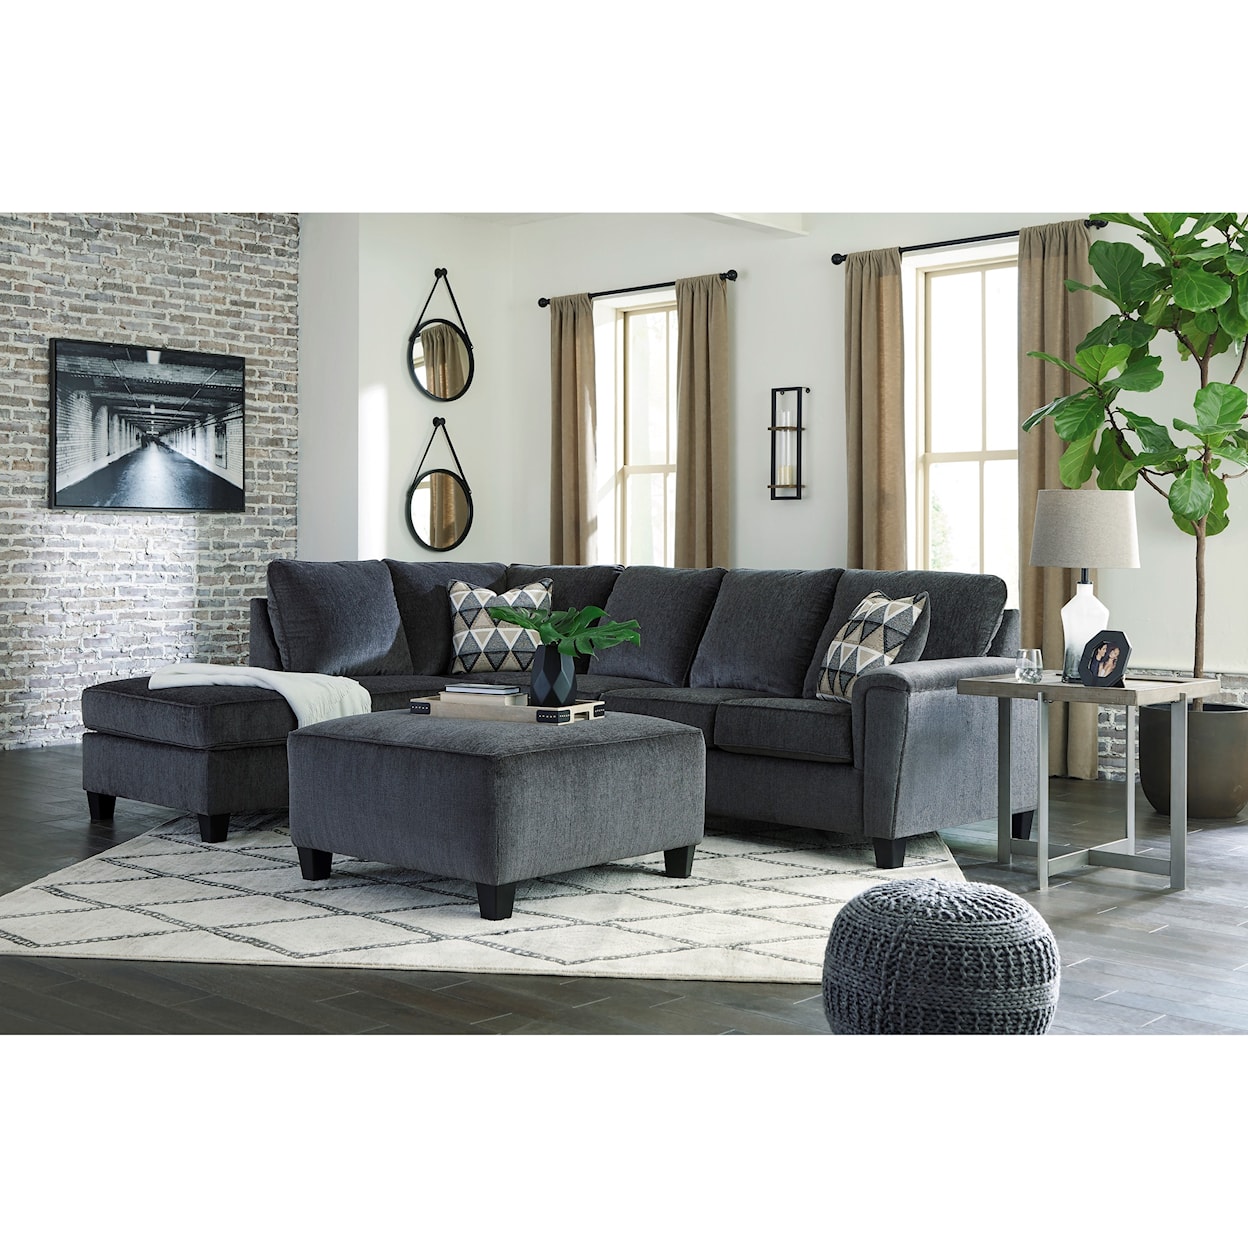 Signature Abinger Living Room Group